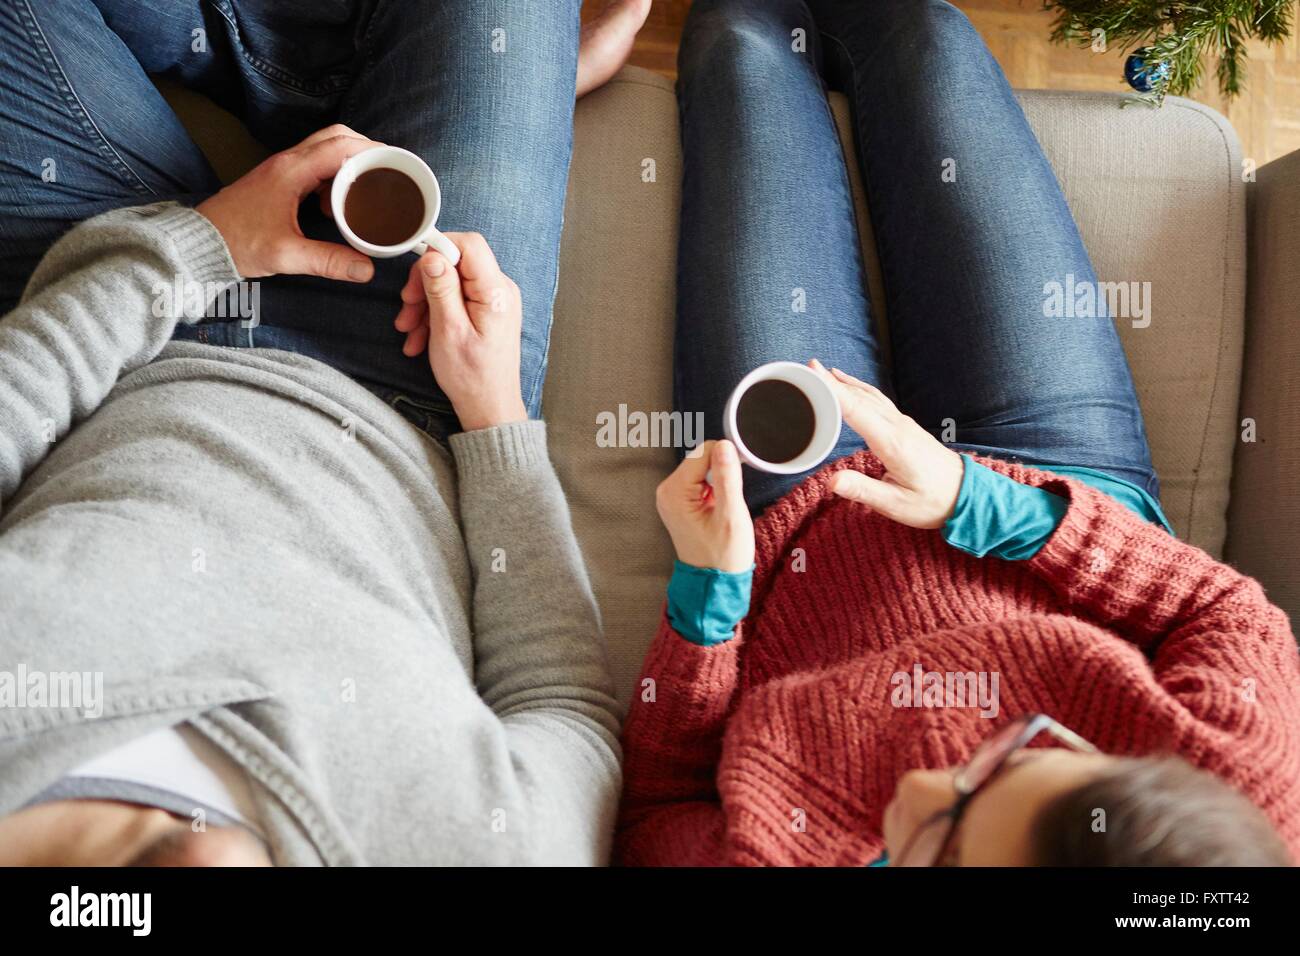 Overhead view of couple sitting on sofa holding coffee cup Stock Photo